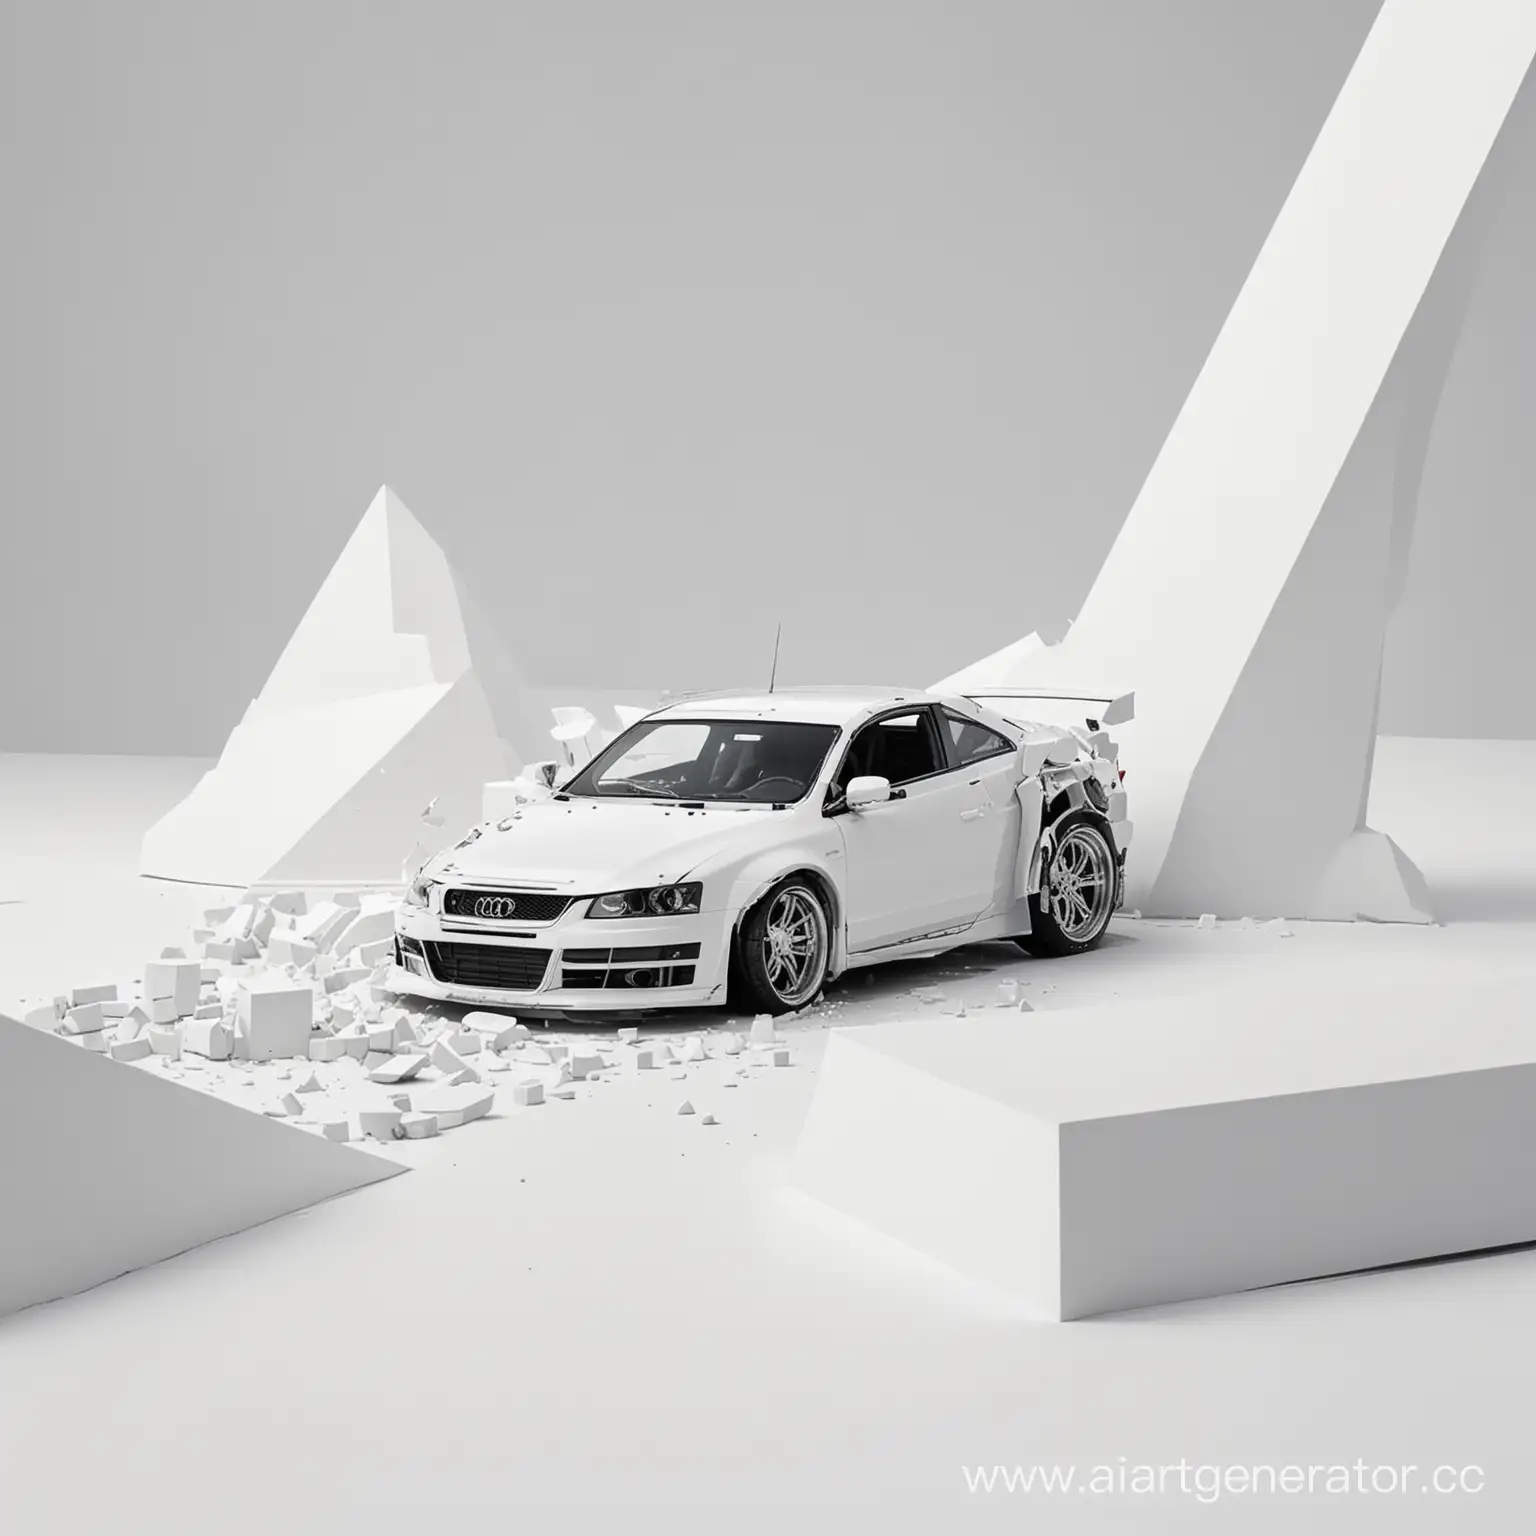 Dynamic-Vehicle-Collision-with-White-Architectural-Forms